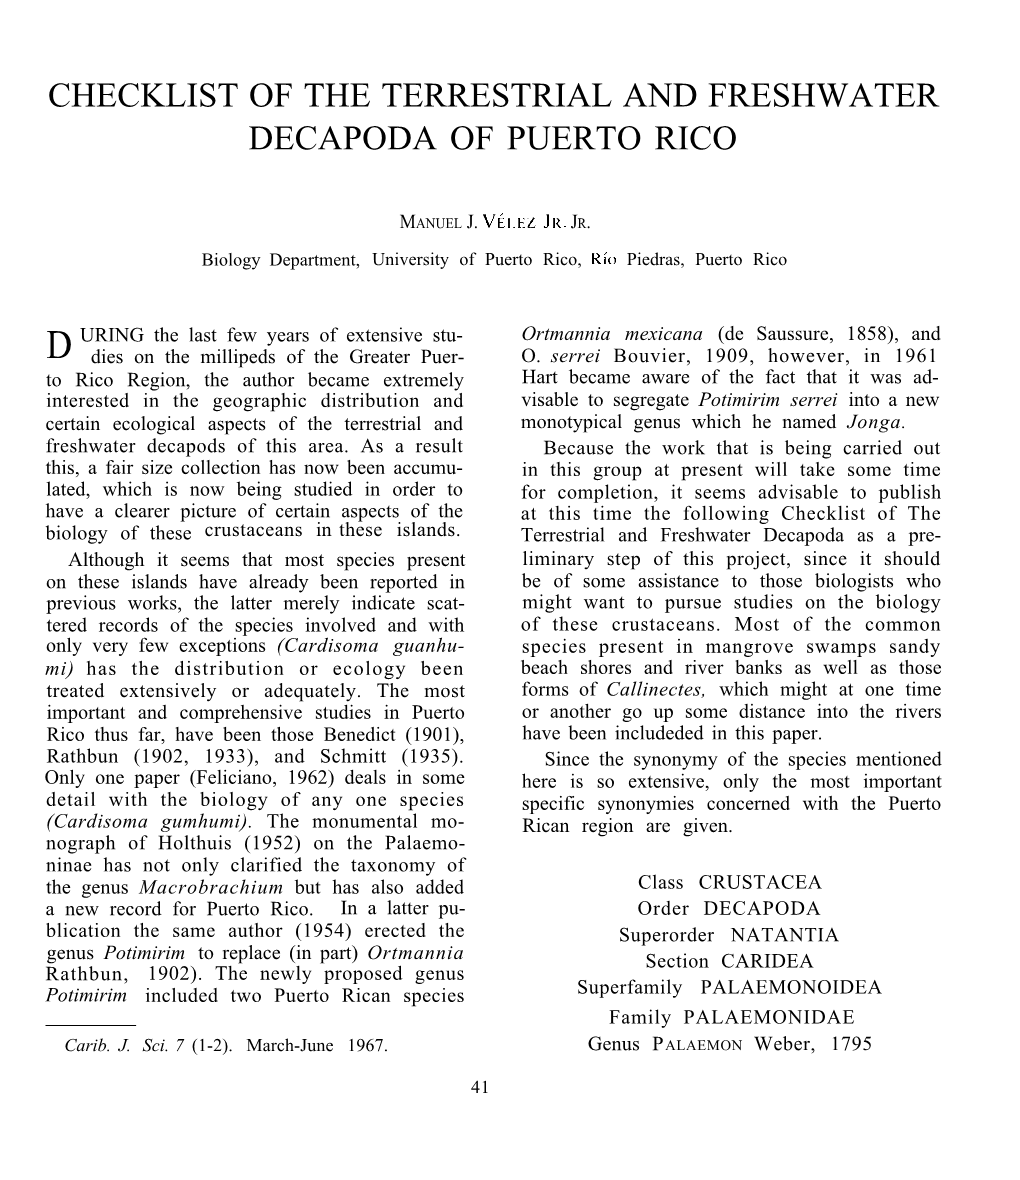 Checklist of the Terrestrial and Freshwater Decapoda of Puerto Rico